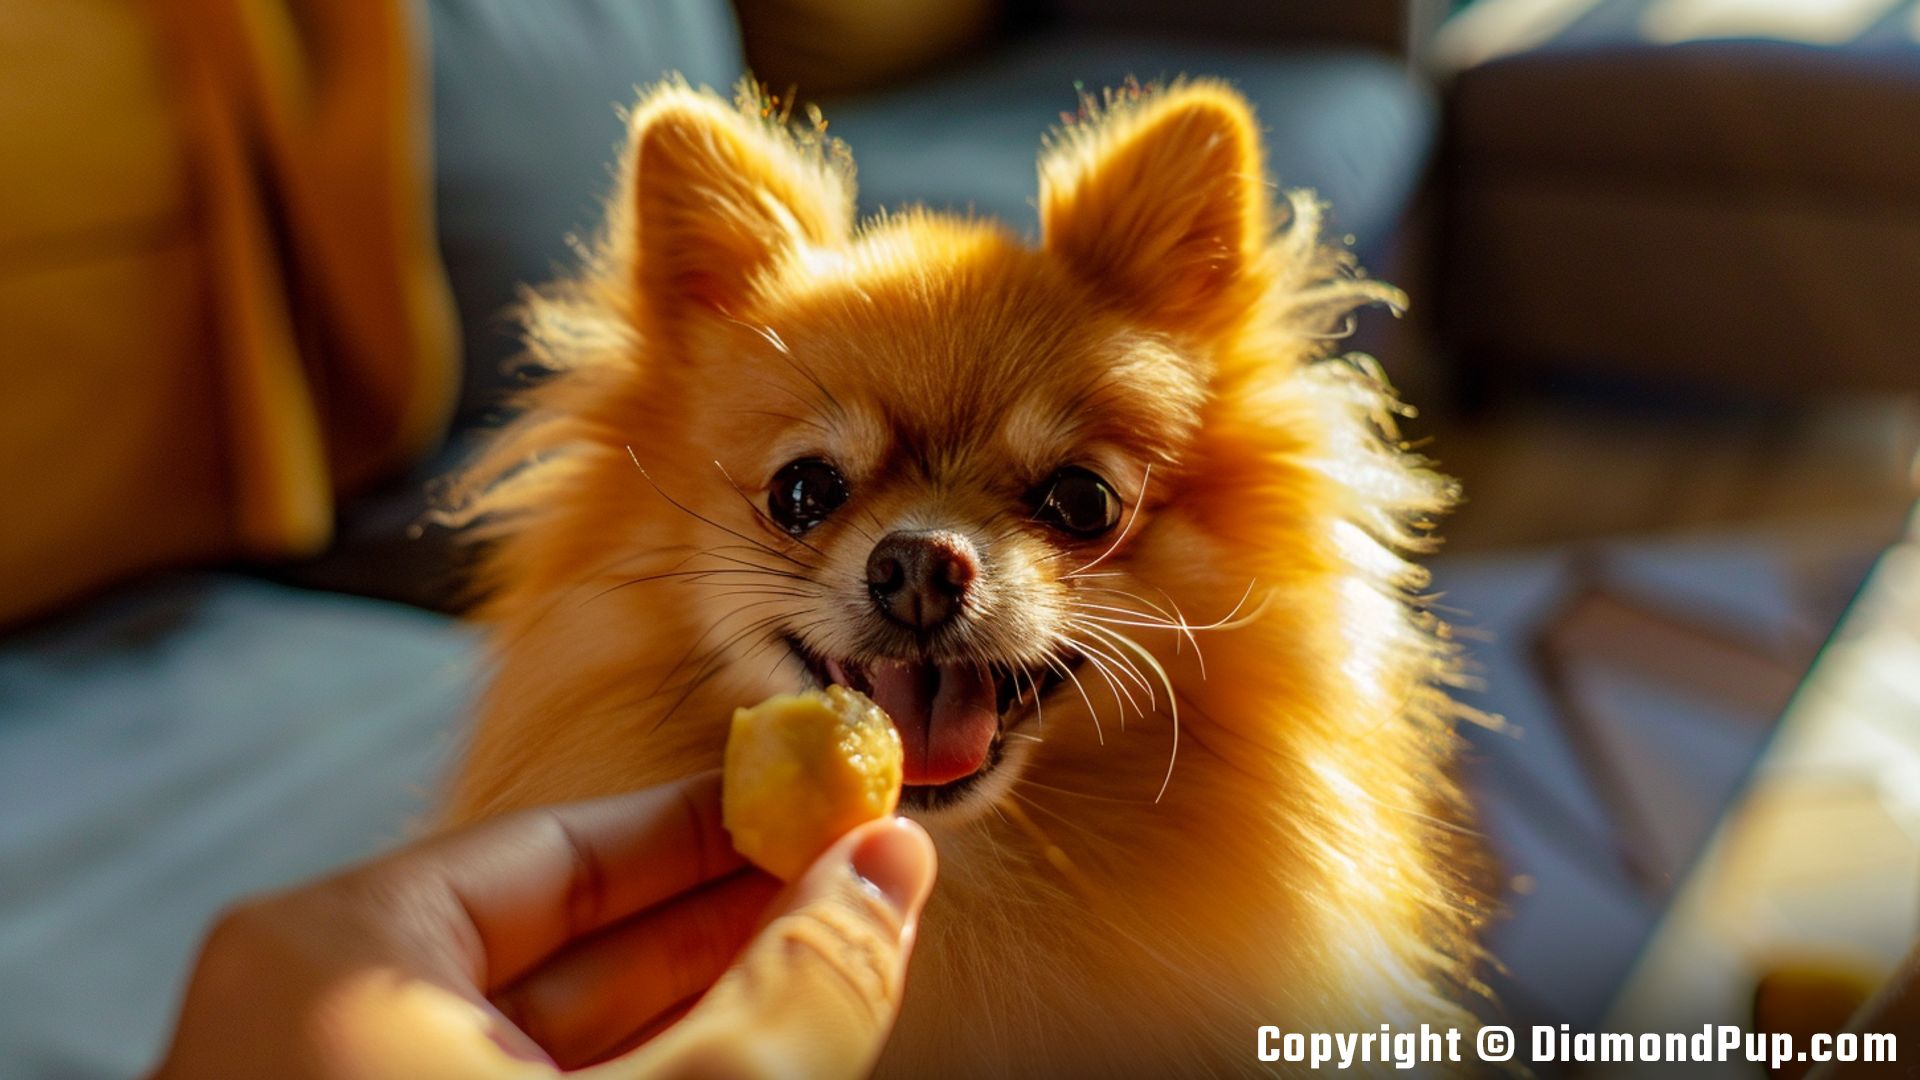 Photograph of a Playful Pomeranian Snacking on Peaches